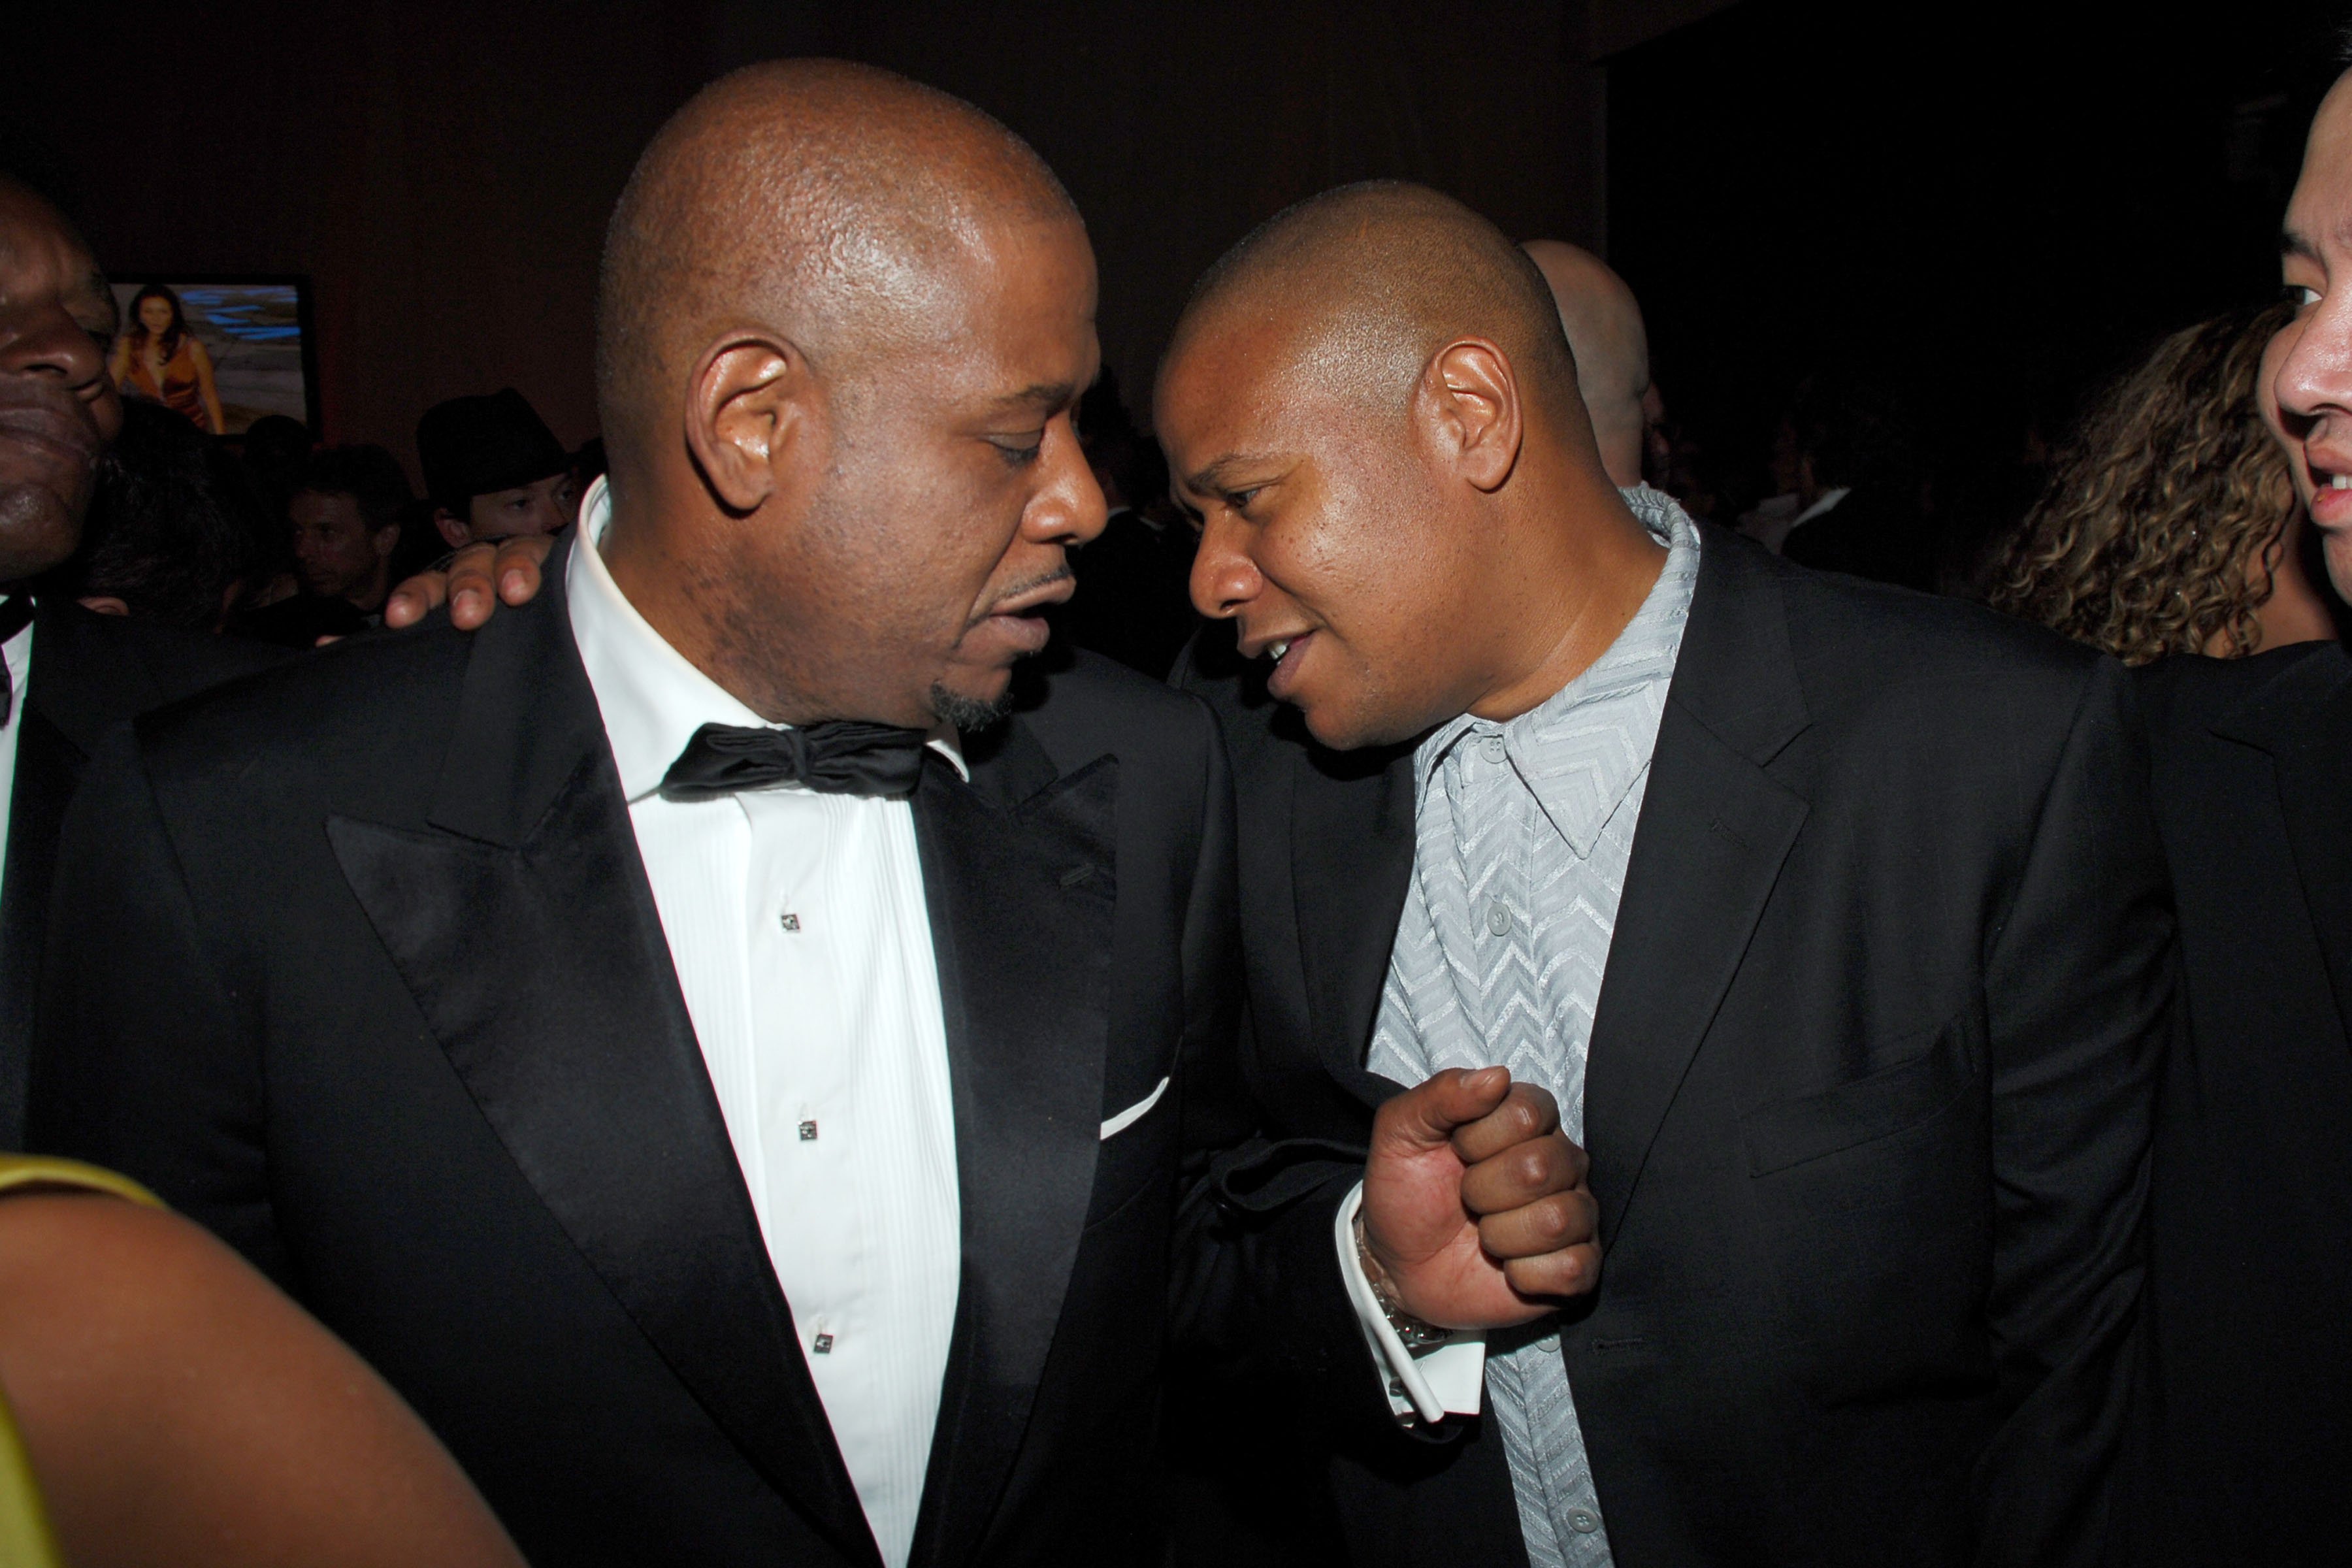 Forest Whitaker and Damon Whitaker at the VANITY FAIR Oscar Party on February 25, 2007 in Los Angeles. | Source: Getty Images